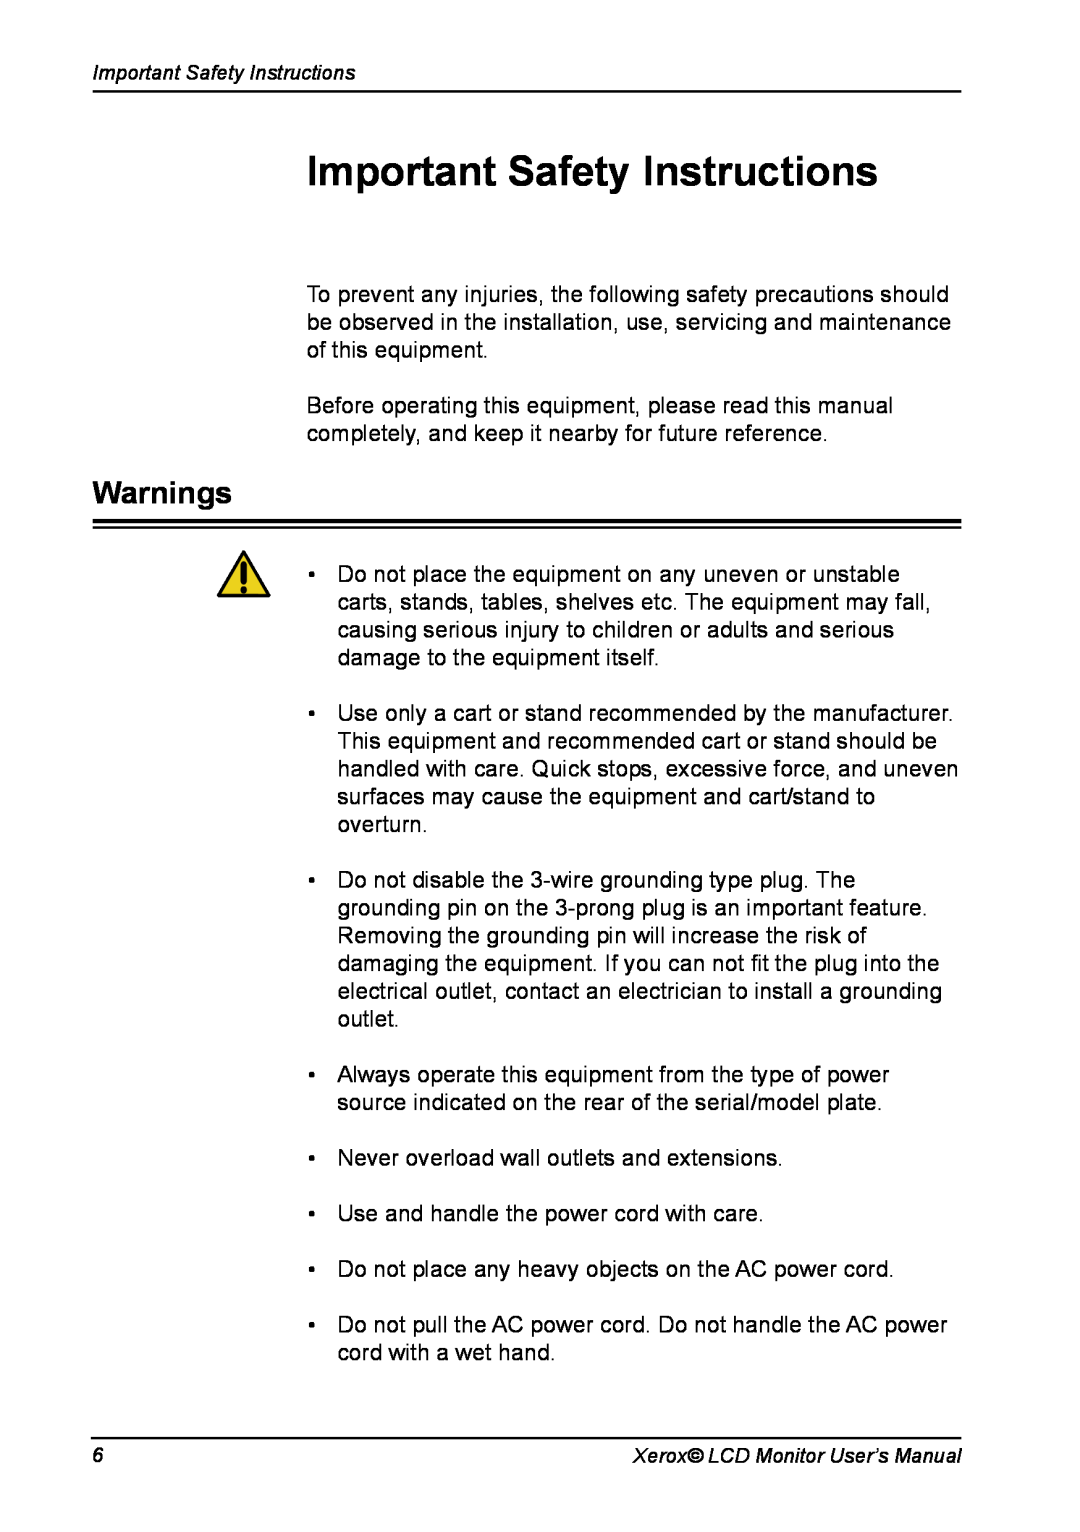 Xerox XM3-19w manual Important Safety Instructions, Warnings 